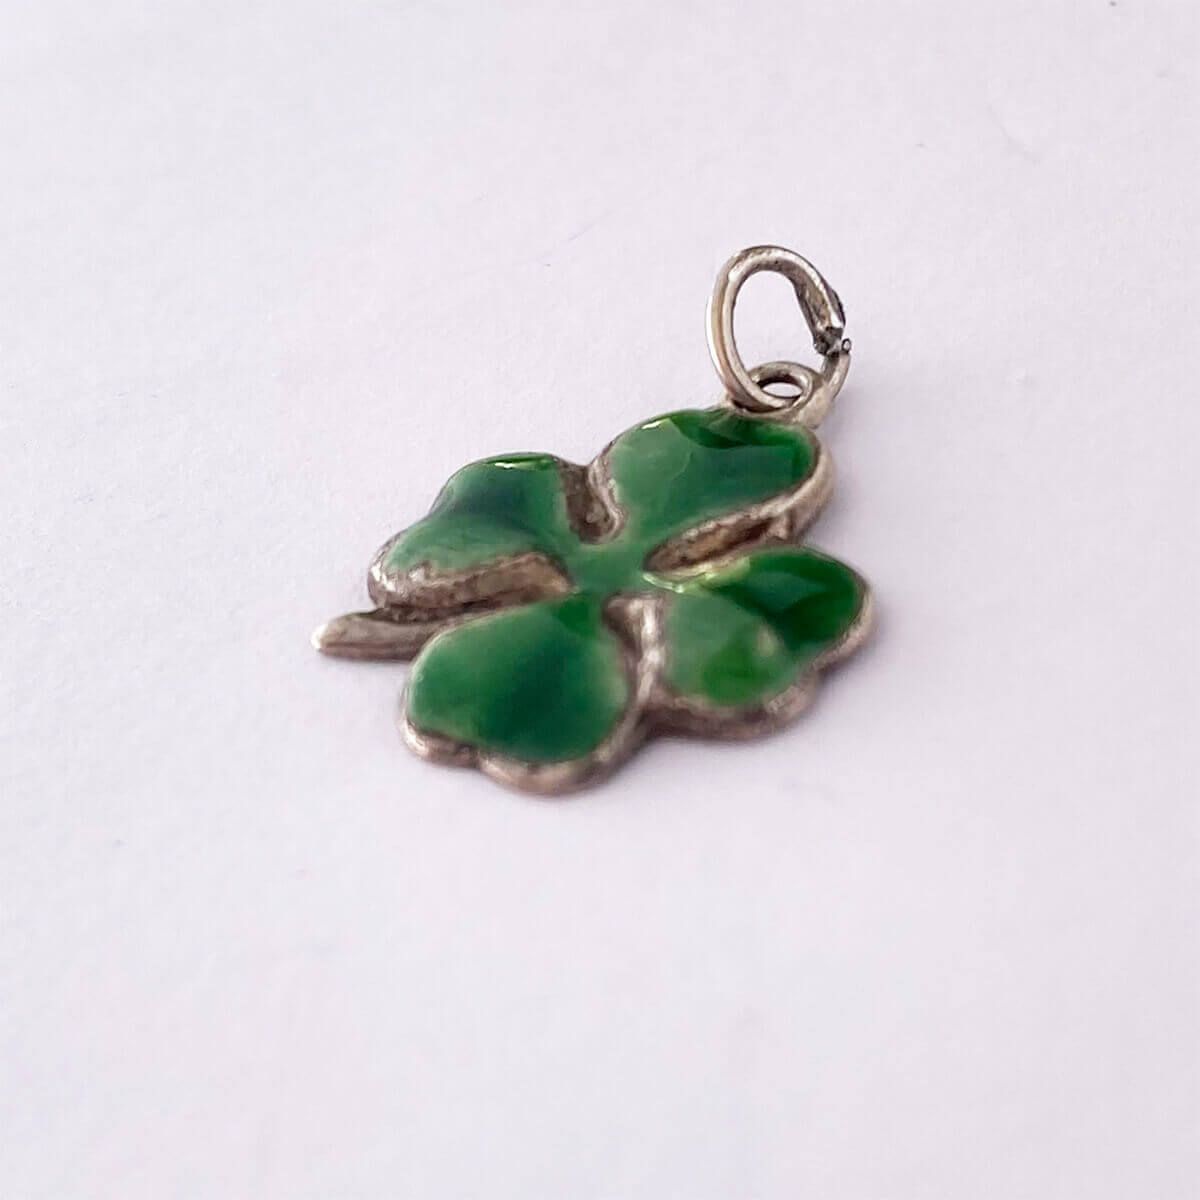 Sterling silver vintage 1940s lucky charm green enamel four leaf clover charm from Charmarama